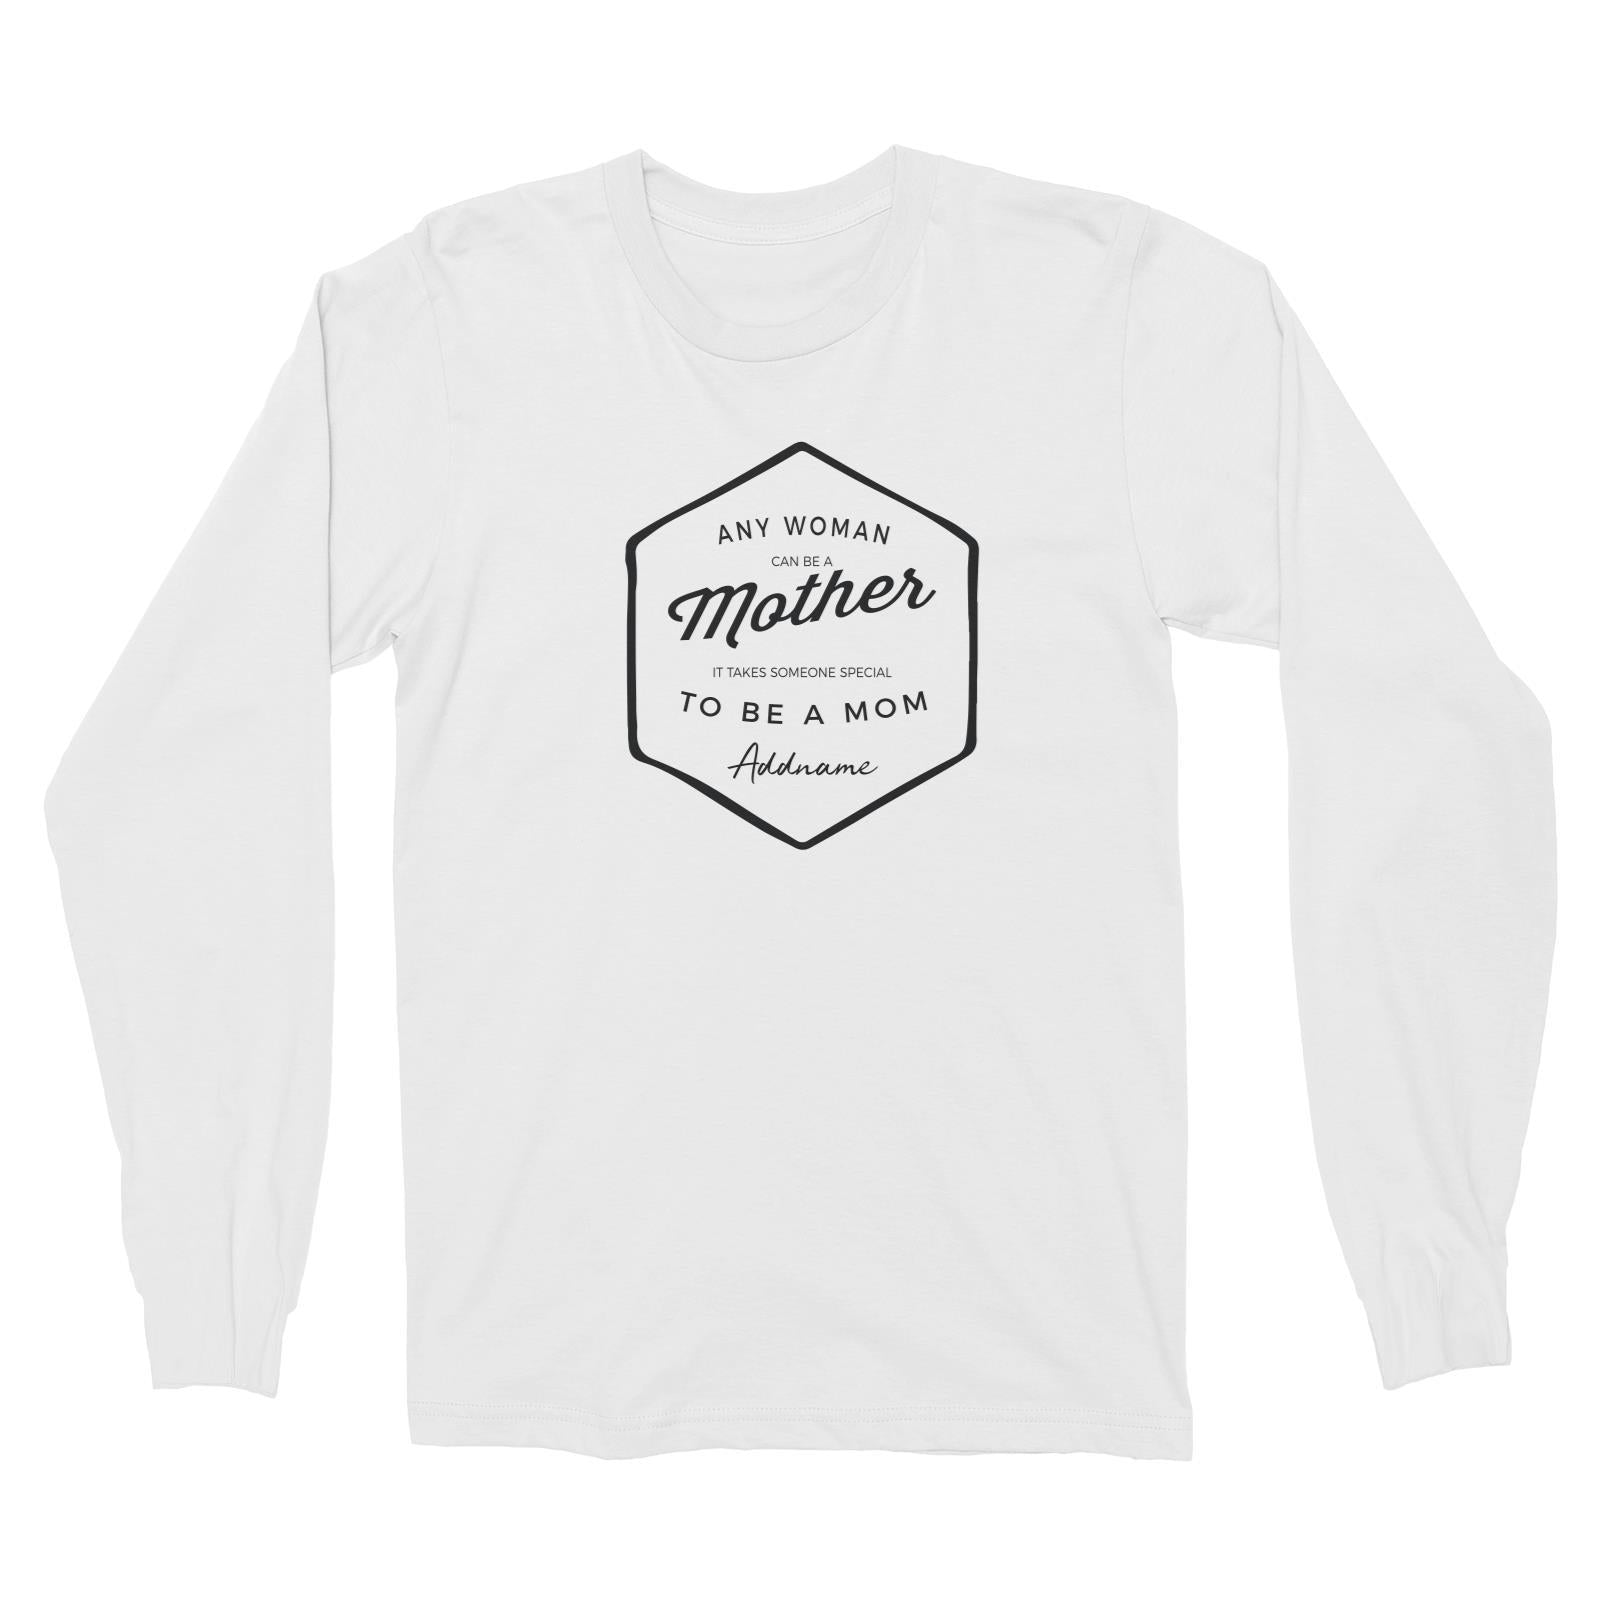 Mom Badge Any Woman Can Be A Mother Addname Long Sleeve Unisex T-Shirt